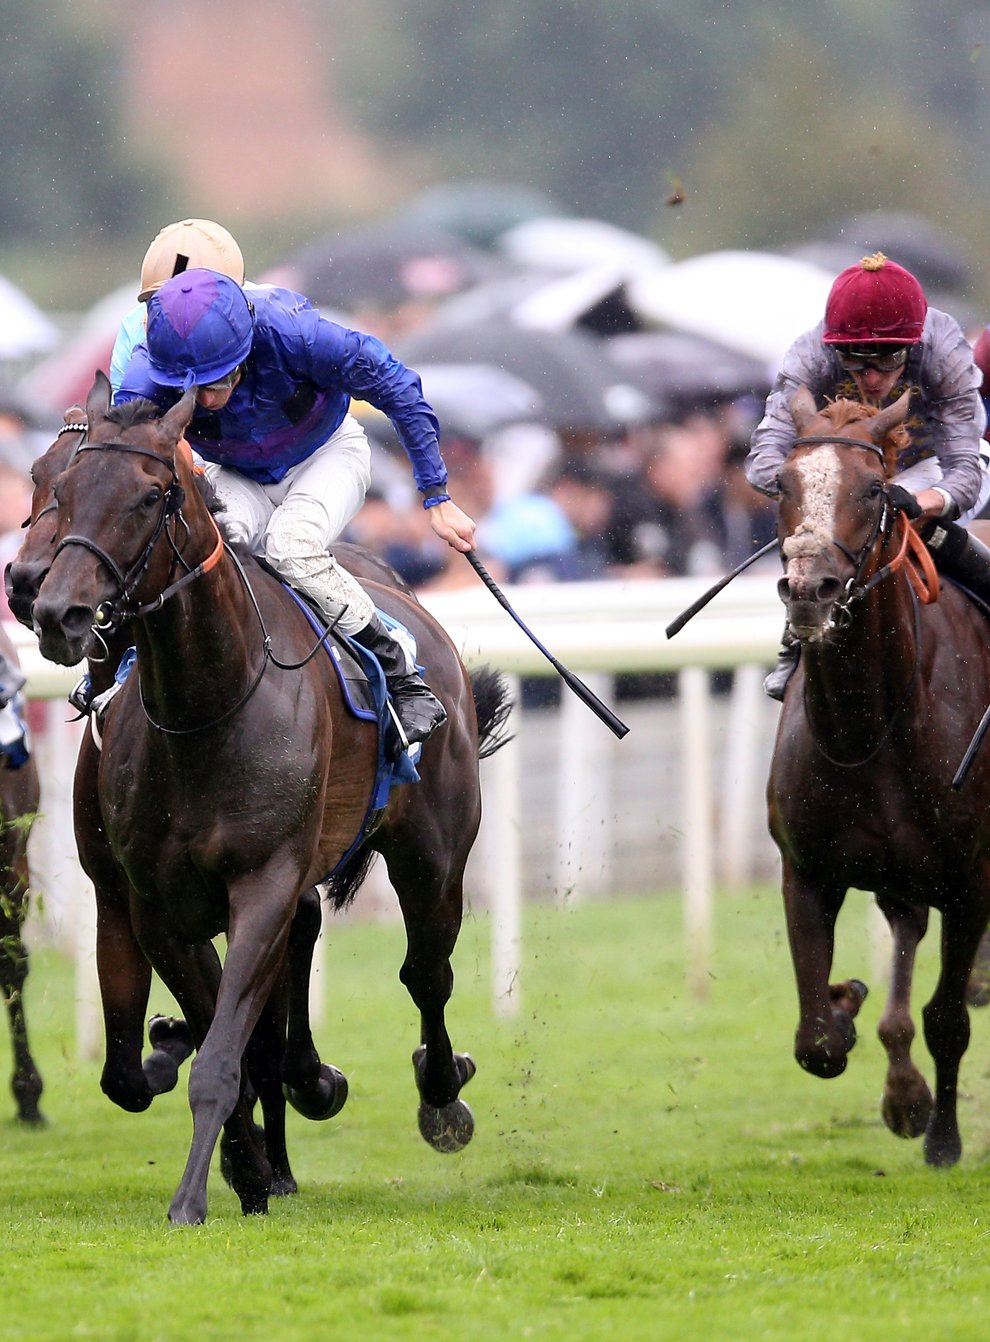 Migration (centre) winning at York (Nigel French/PA)